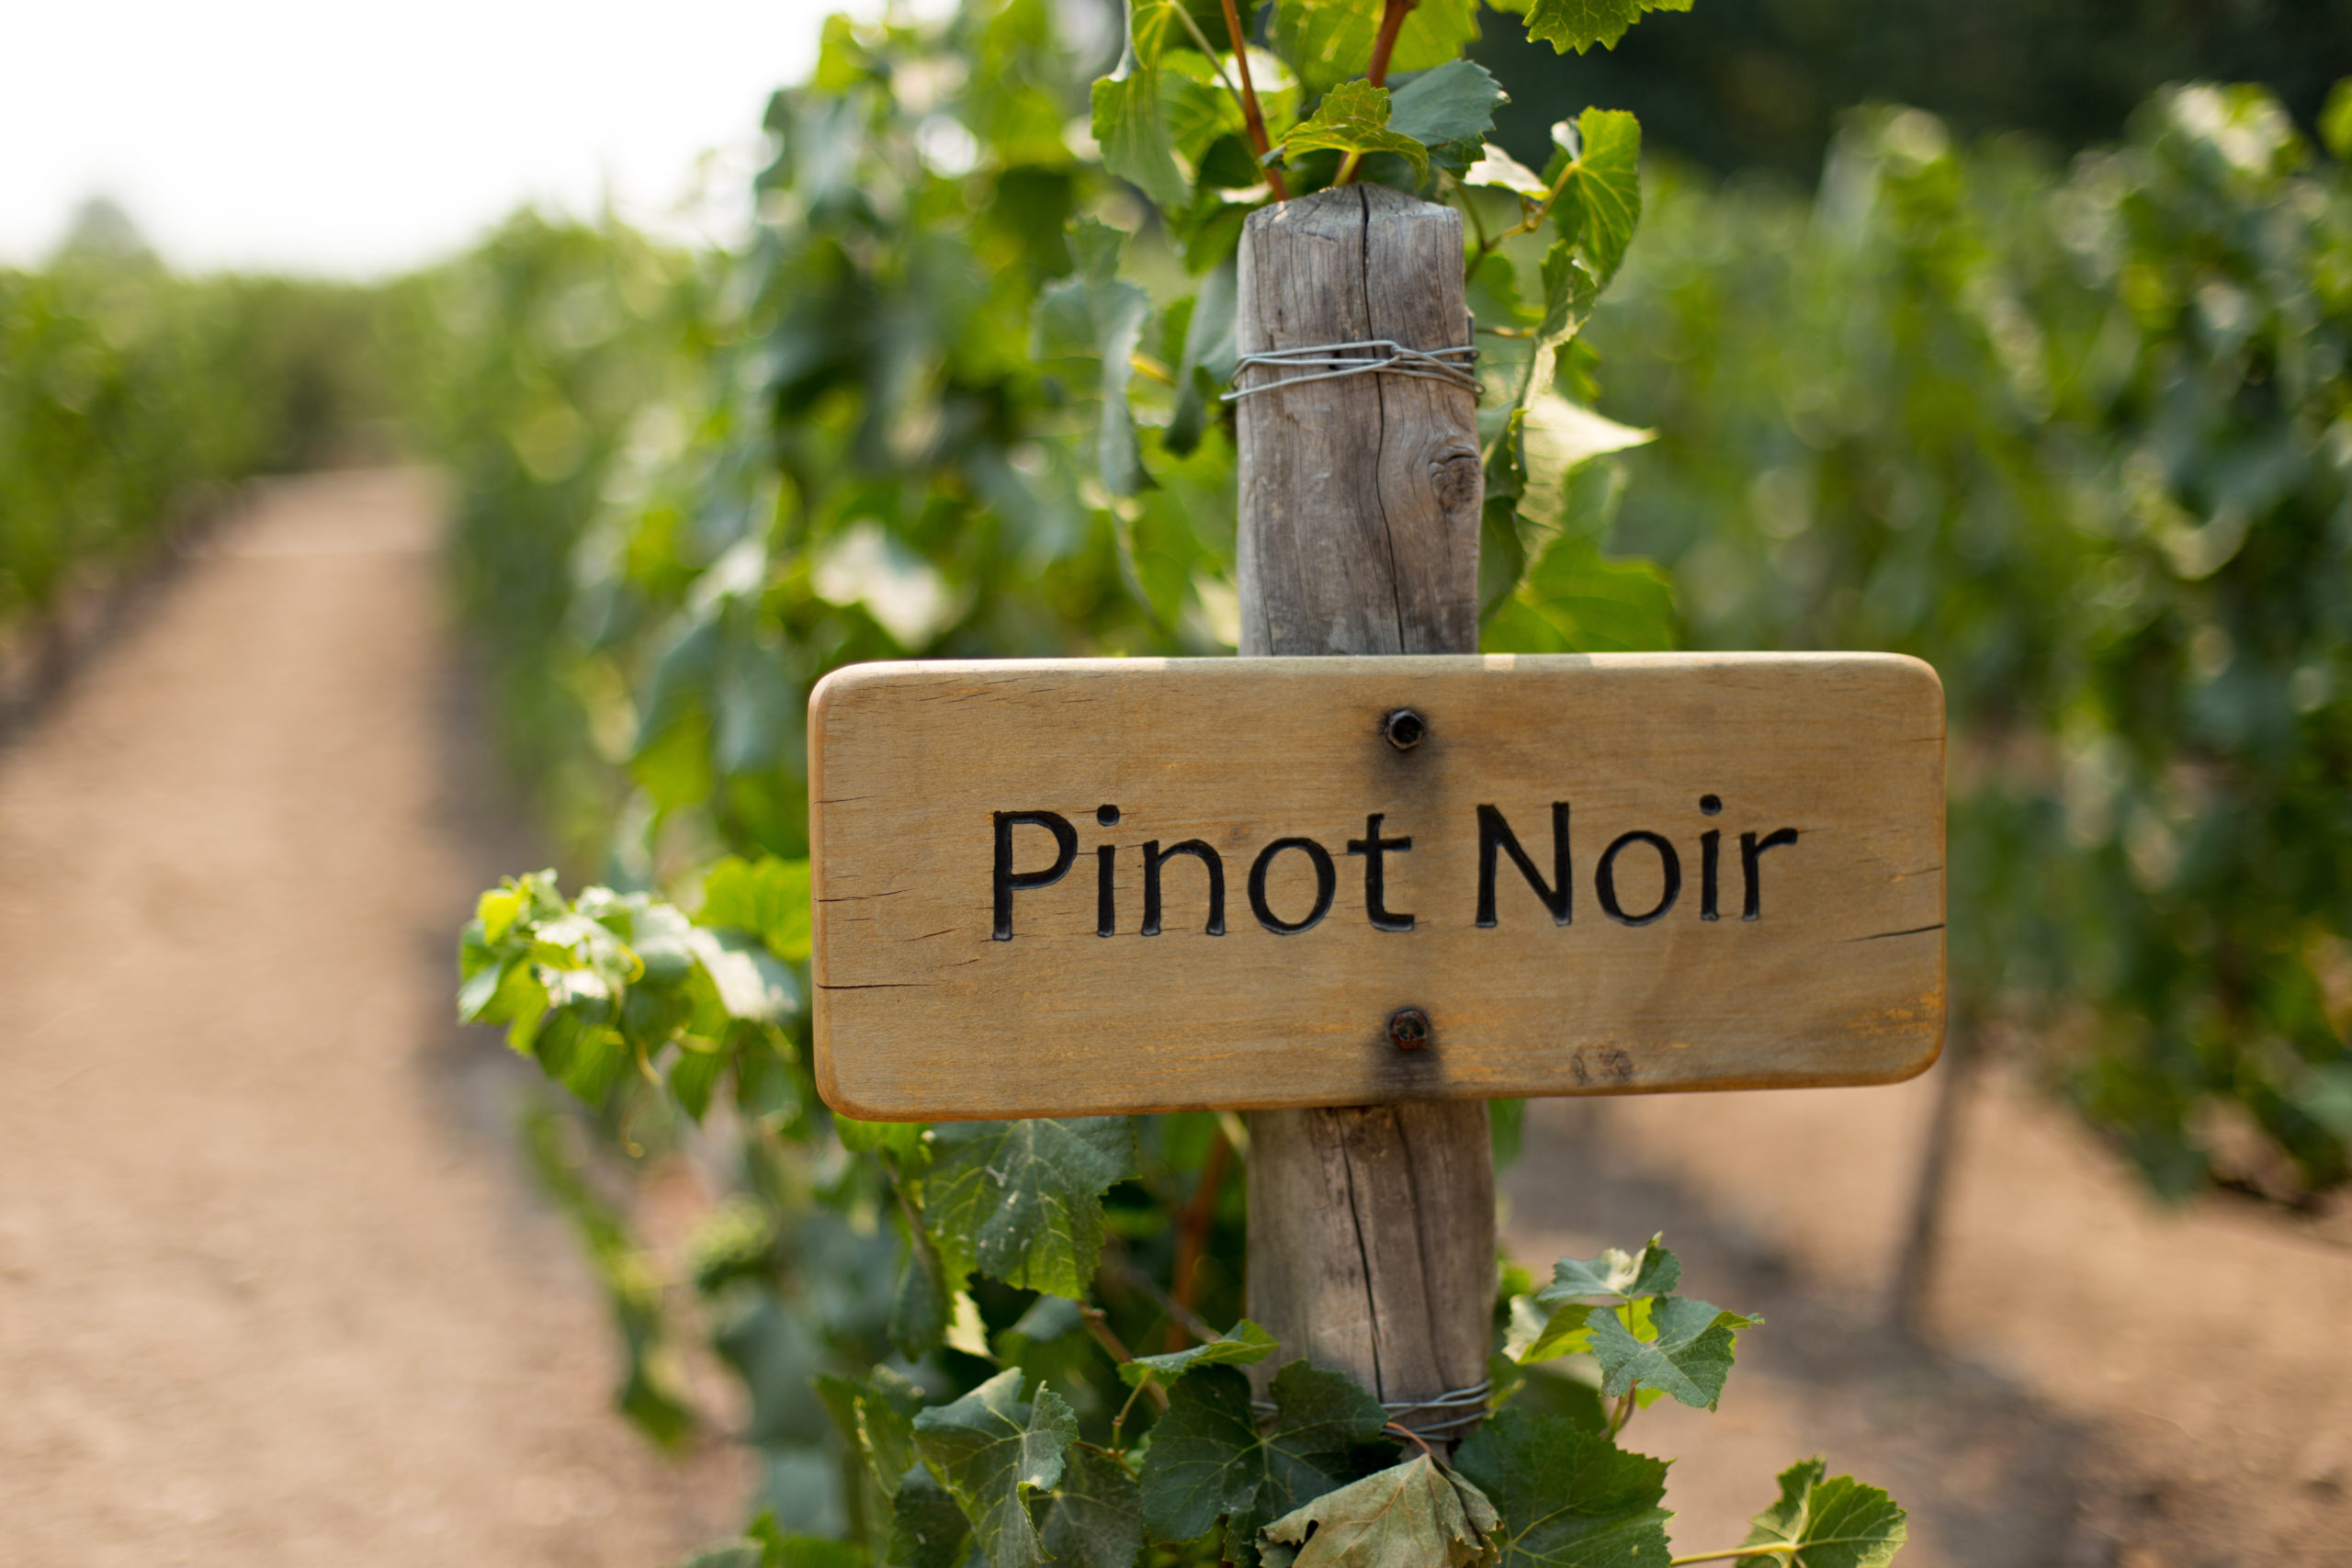 What is pinot noir?